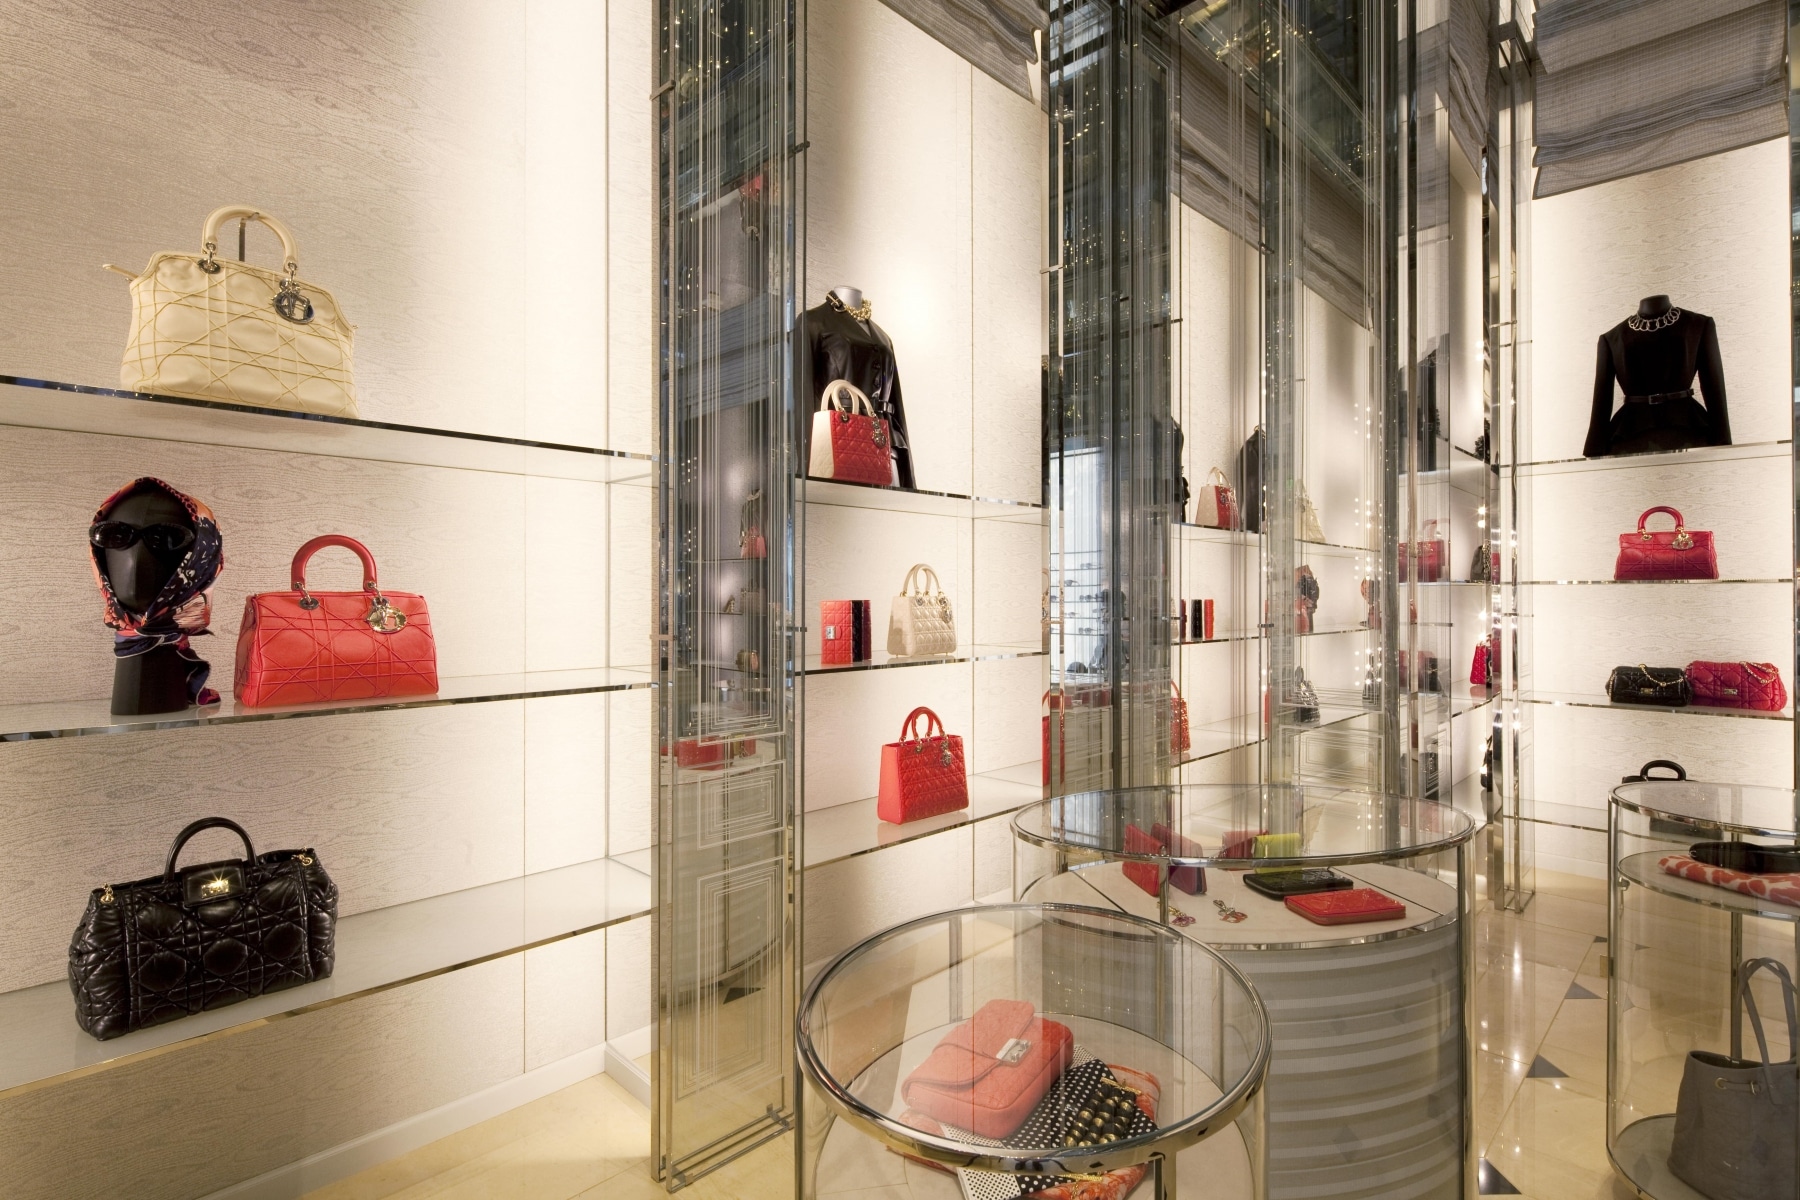 Christian Dior boutique on Rodeo Drive 057, Dior 309 N. Rod…